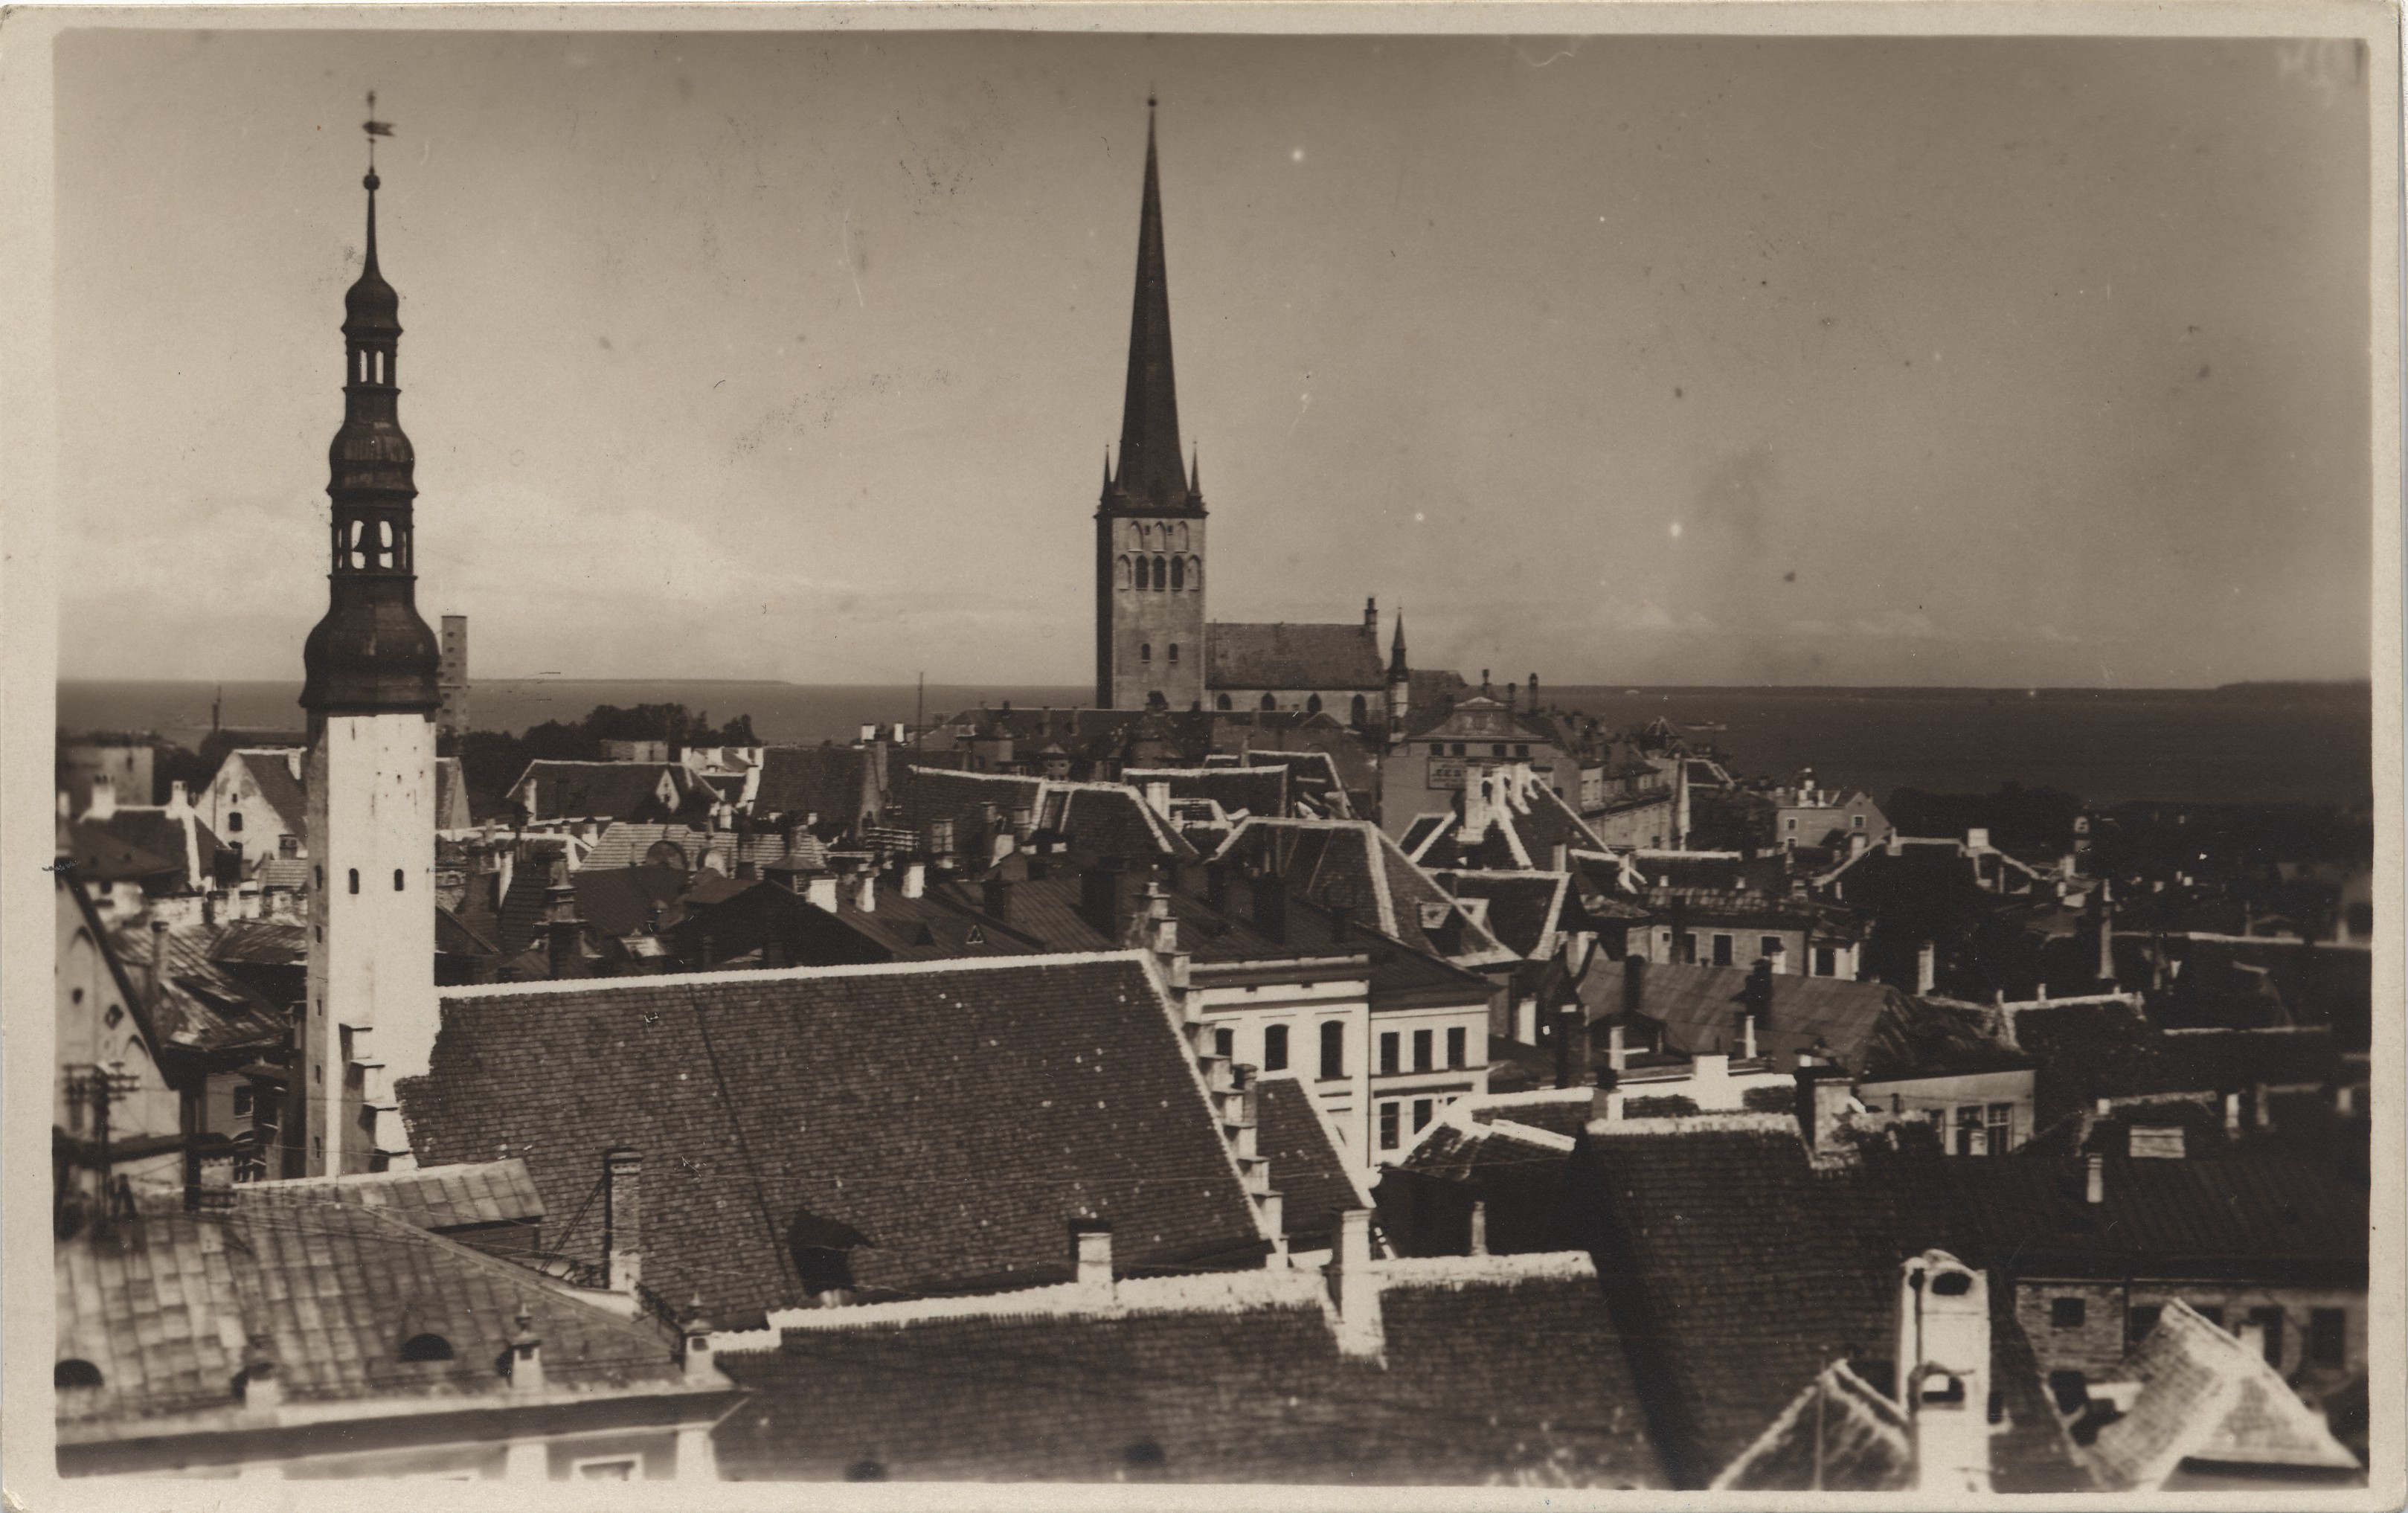 Estonia-tallinn : view of the tower of the building